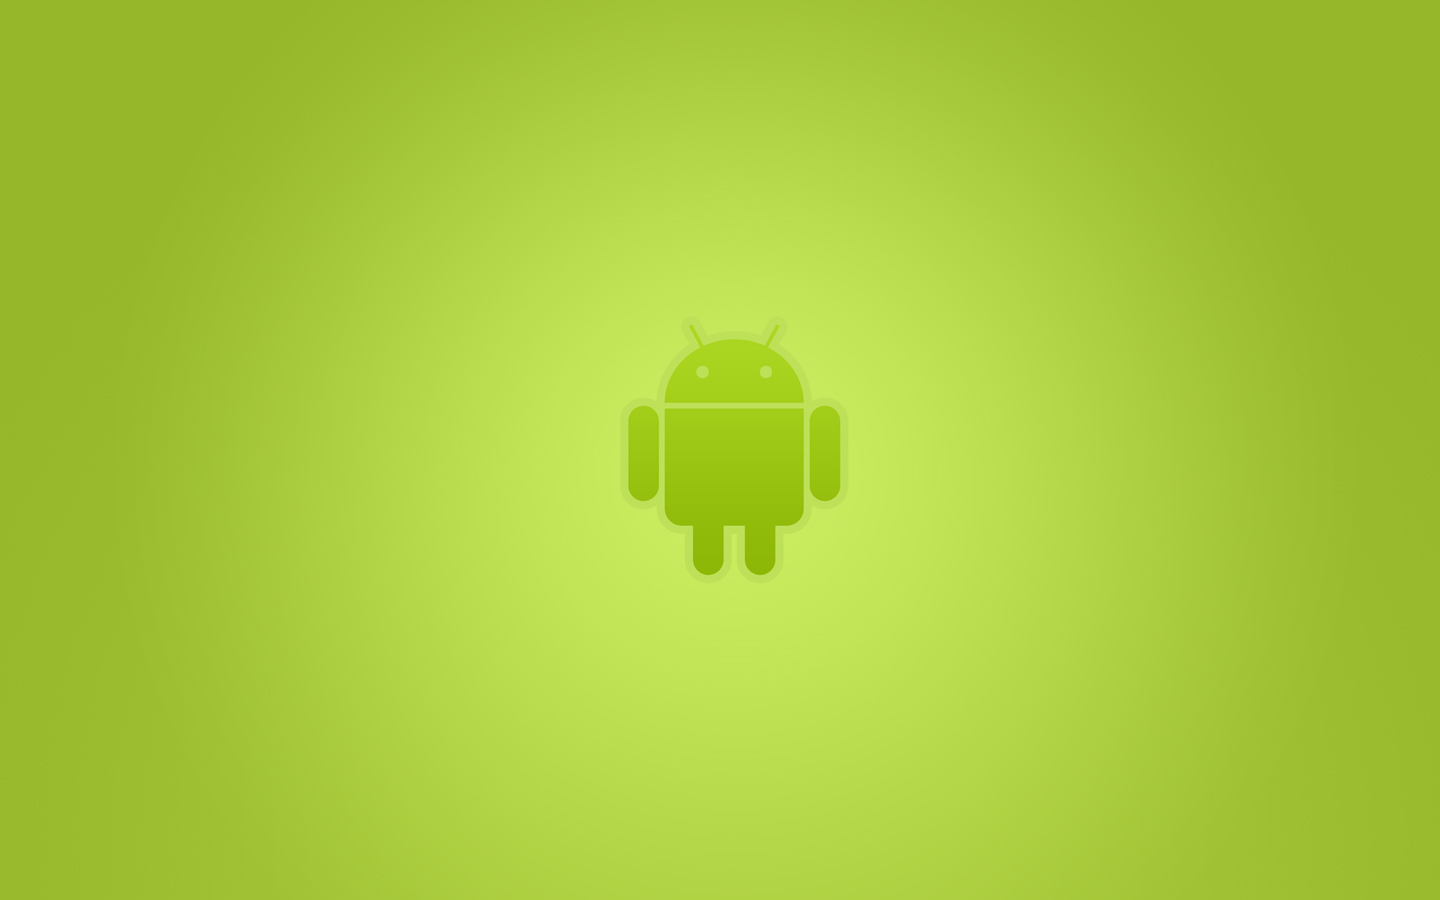 48 7 Inch Android Tablet Wallpaper On Wallpapersafari